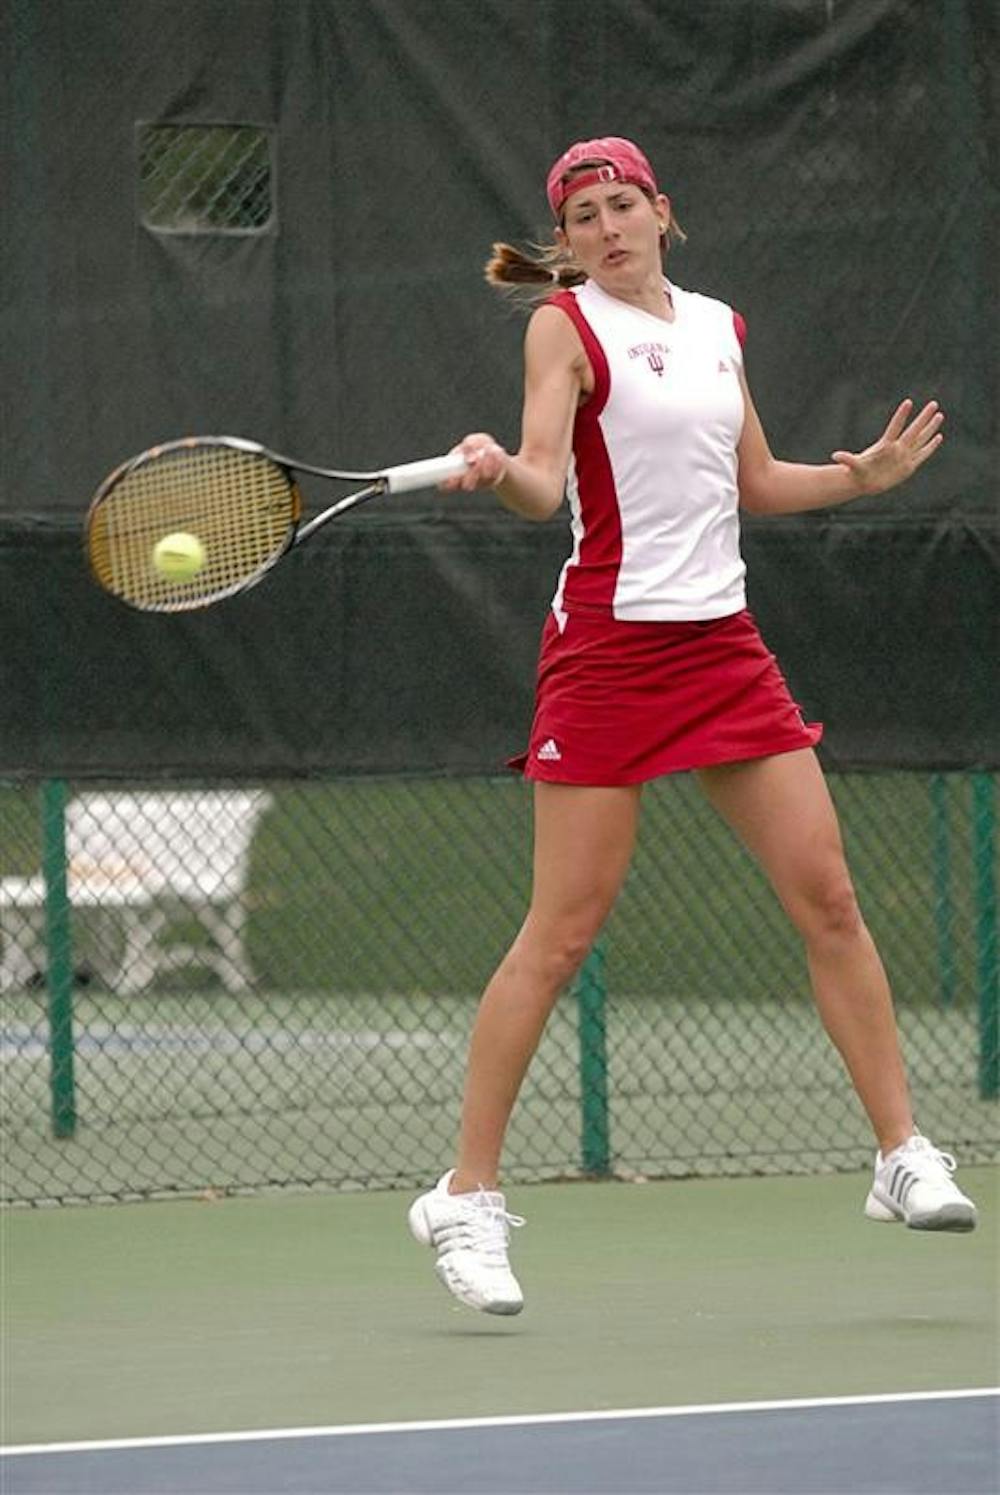 Sophomore Myriam Sopel swings through a forehand. Sopel won both her matches in straight sets and her win over Minnesota helped clinch the win for IU.